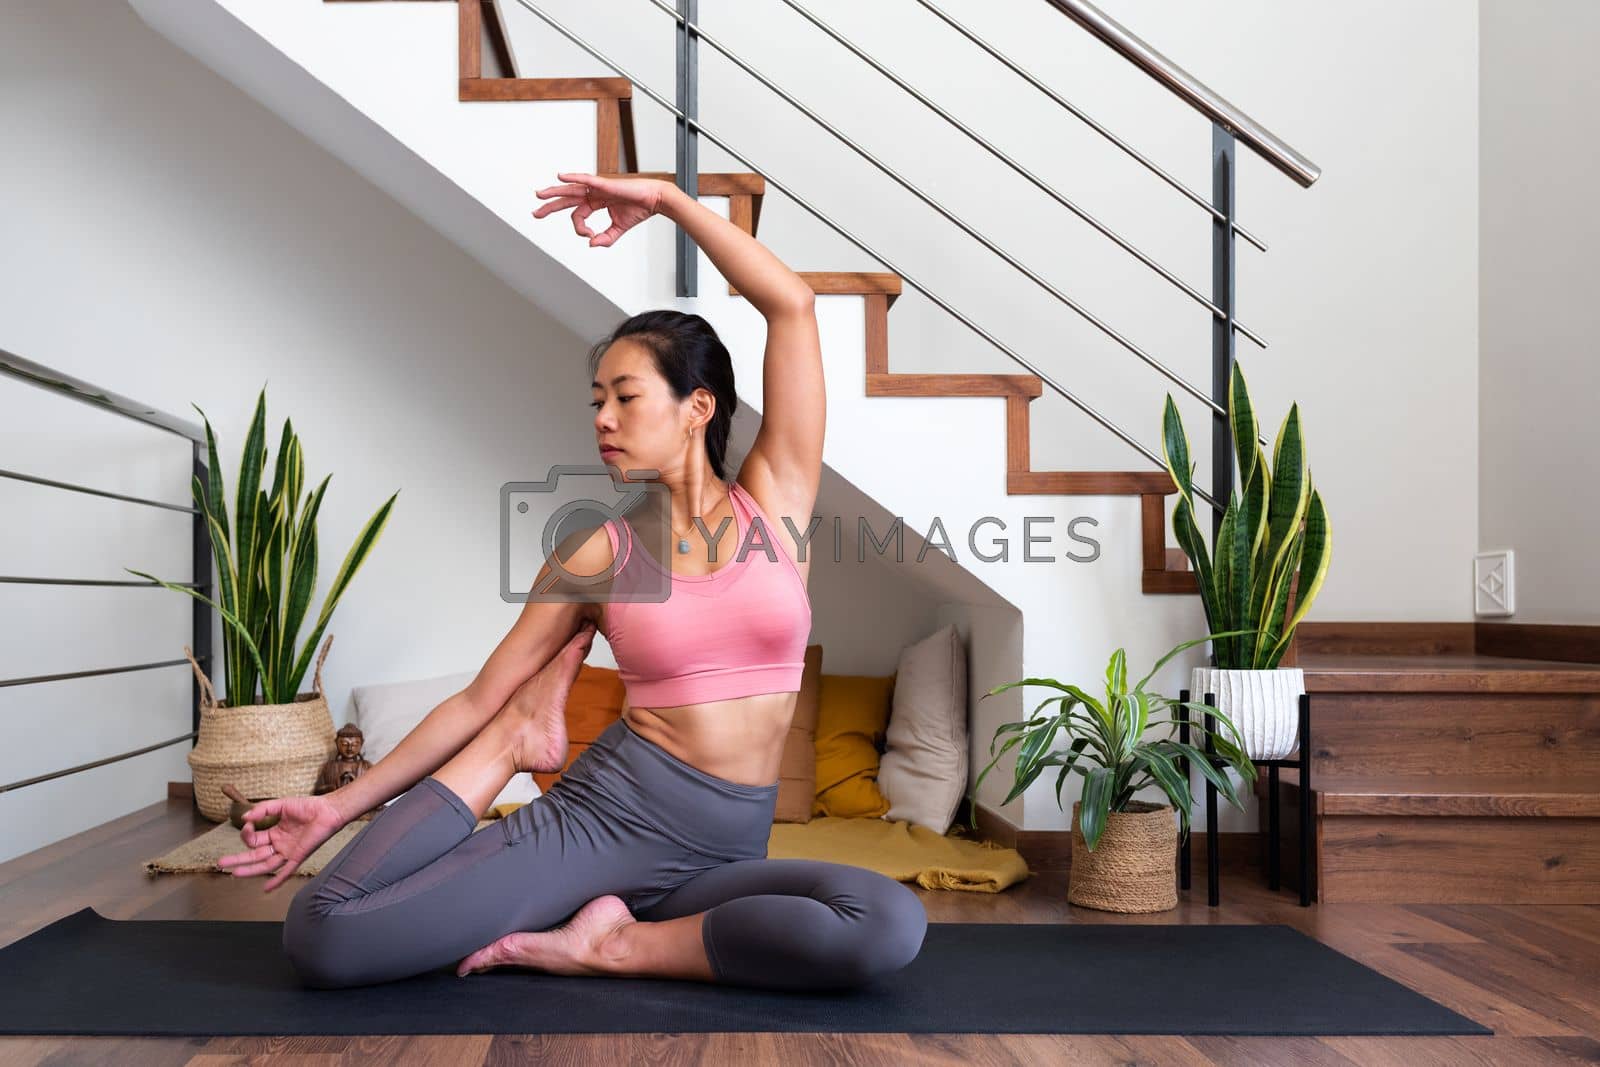 Royalty free image of Young flexible Asian woman doing beautiful yoga asana at home living room. Healthy lifestyle by Hoverstock